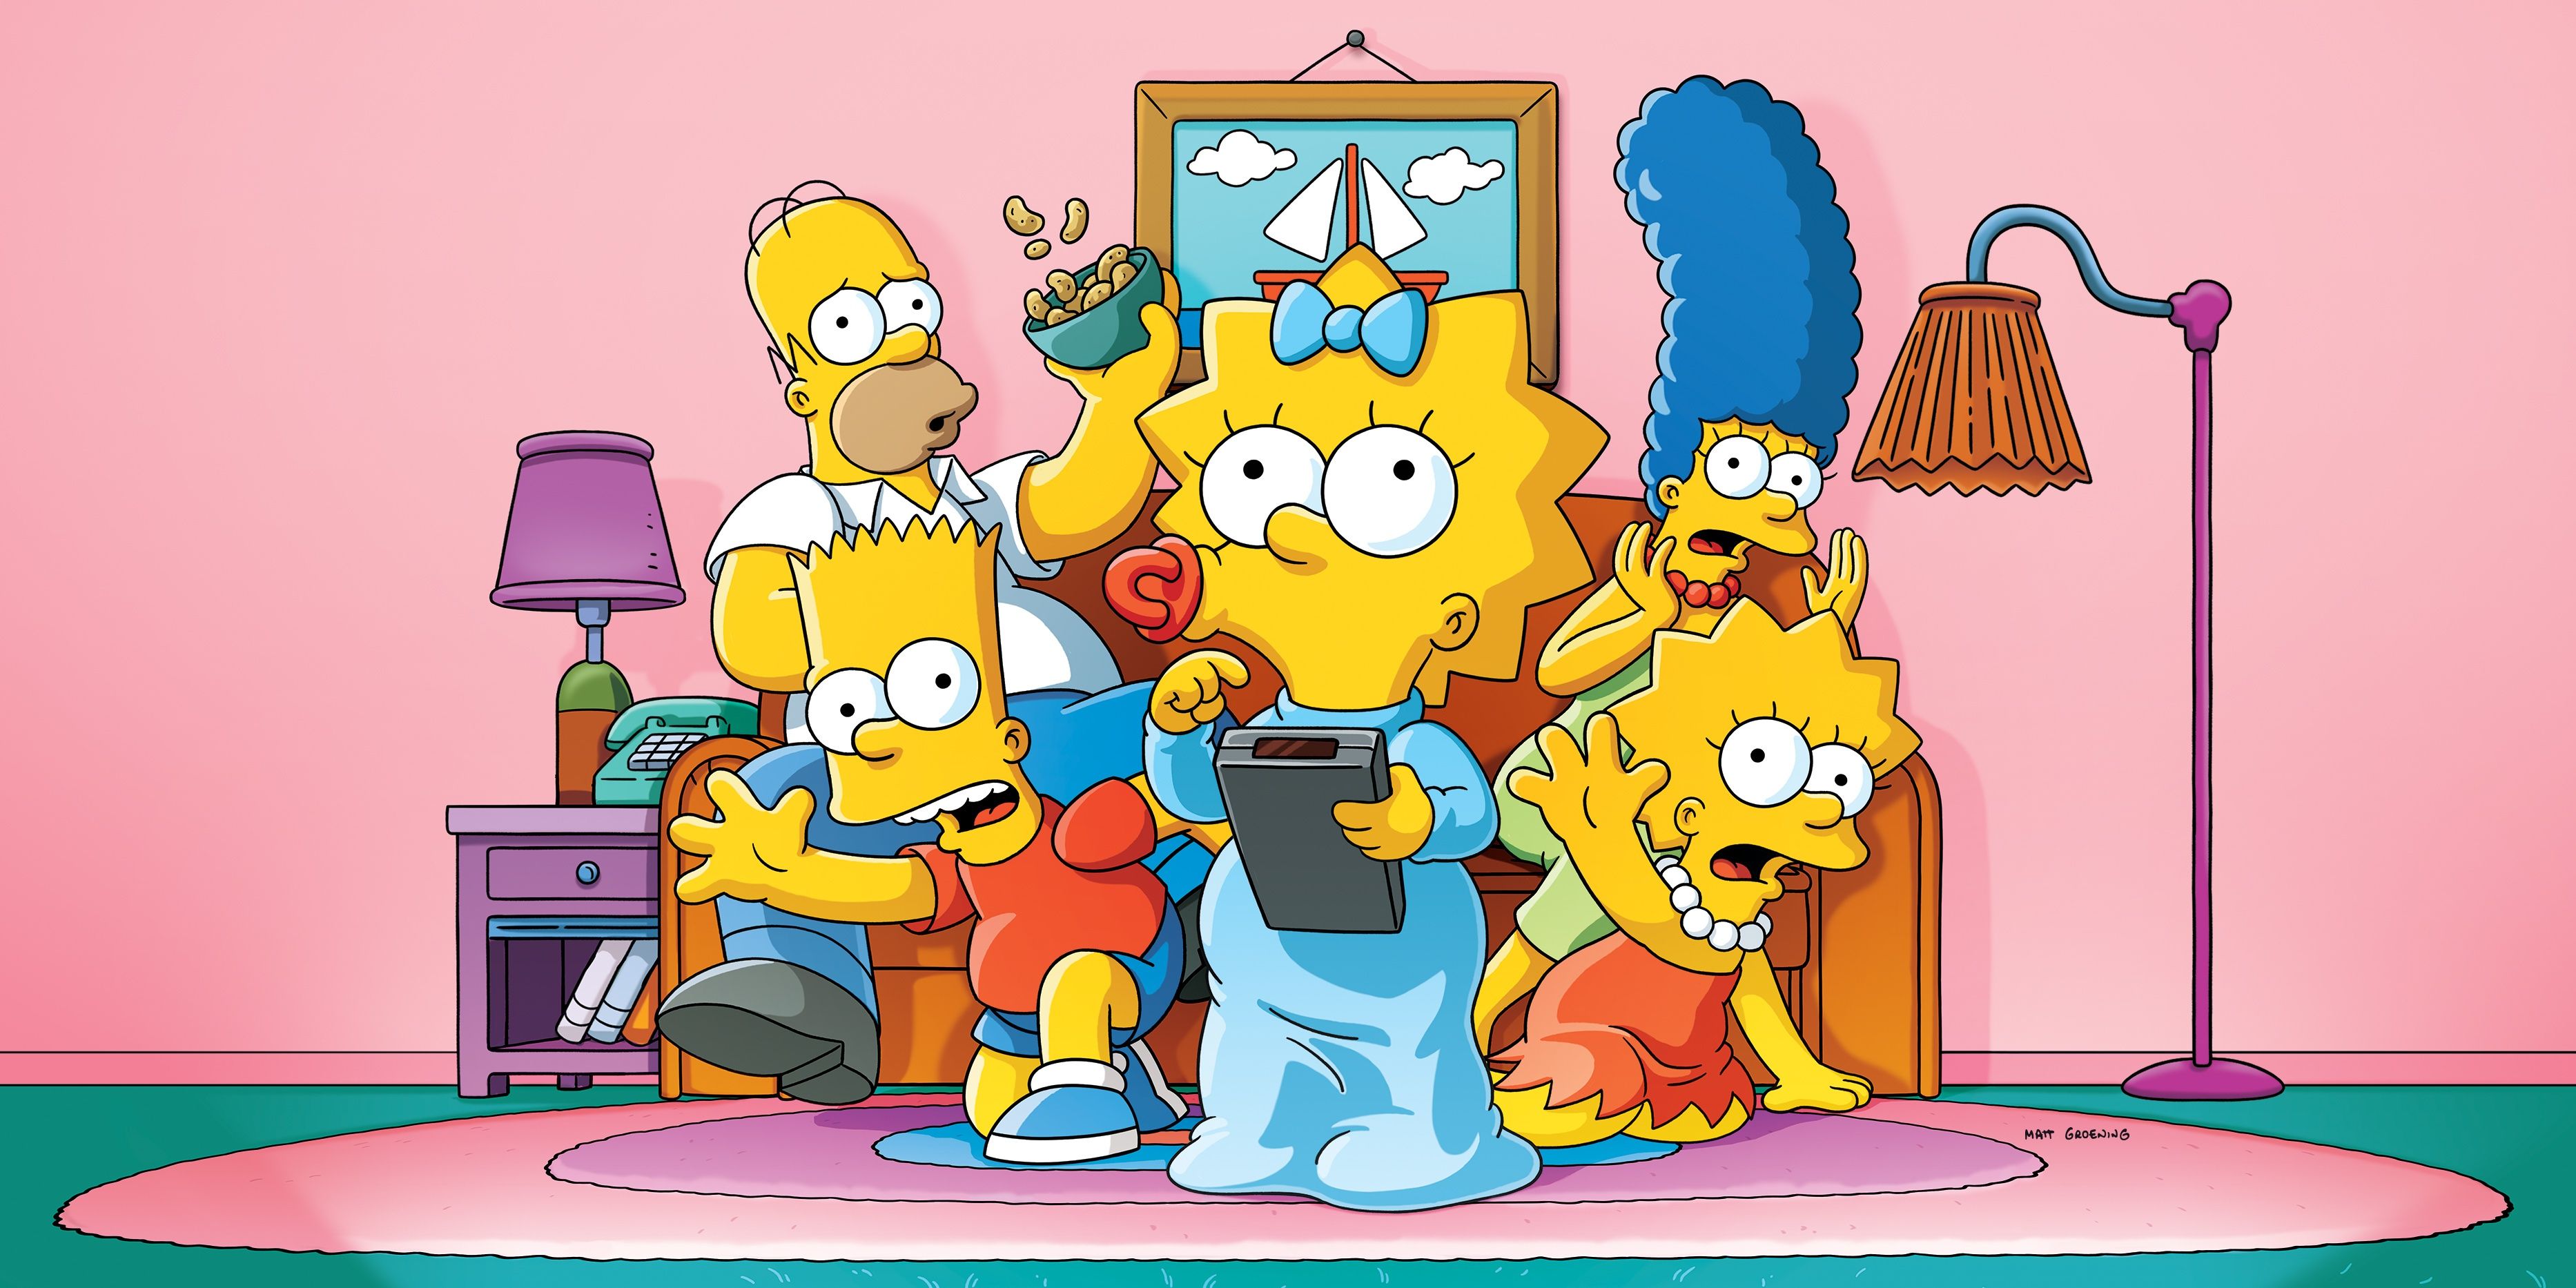 The Simpsons family in the living room from the animated series